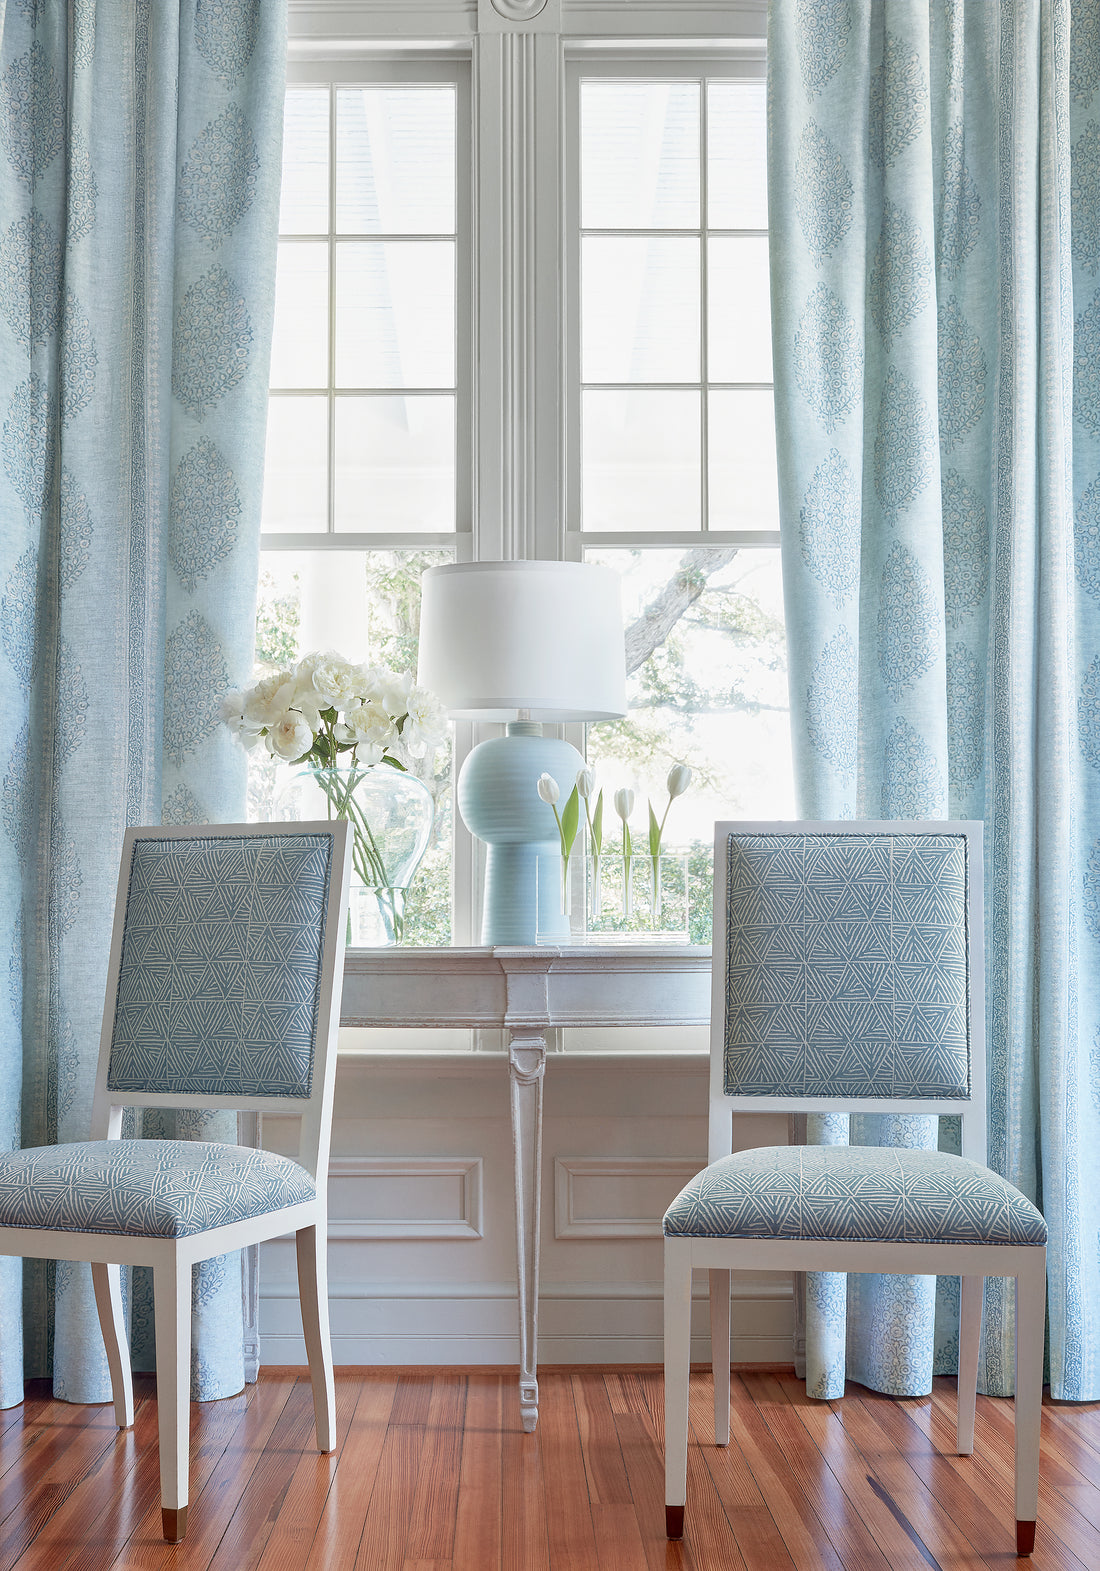 Lauderdale chairs in Mombasa printed fabric in slate blue color - pattern number F910207 by Thibaut in the Colony collection